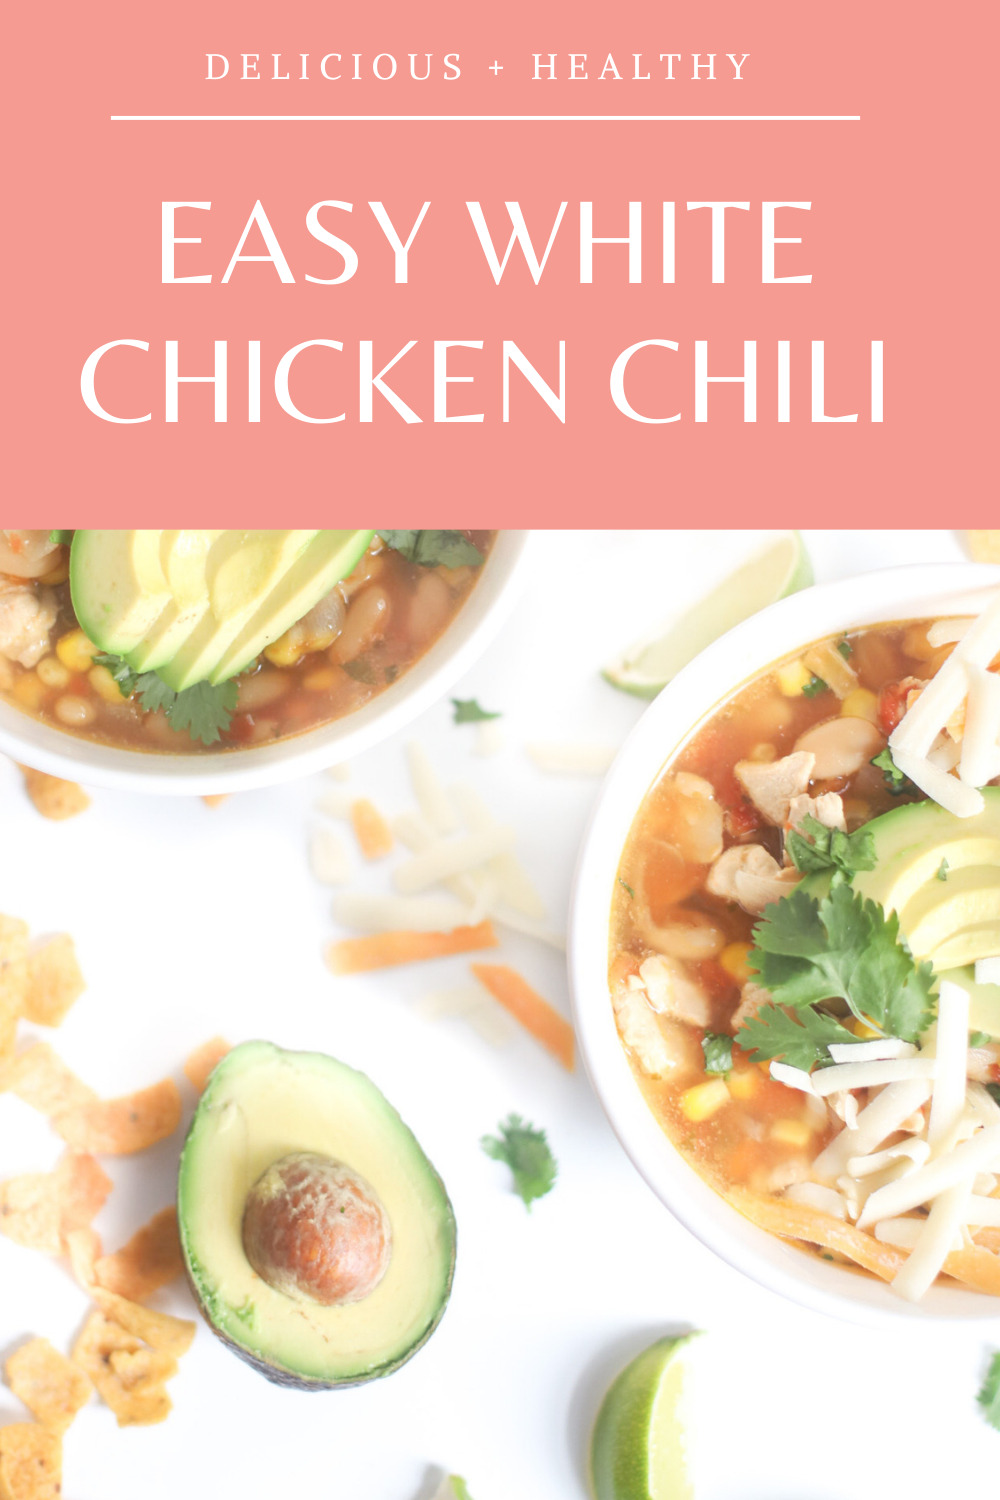 Of all of the chili recipes out there, this white chicken chili is our family’s most loved. Not only is this healthy white chicken chili super flavorful and a total crowd-pleaser, it’s easy to make and is pretty much foolproof. And the resulting rich broth, tender chicken, hearty white beans and corn, plus a bright tang from the lime and cilantro, makes this soup a total winner. | @glitterinclexi | GLITTERINC.COM